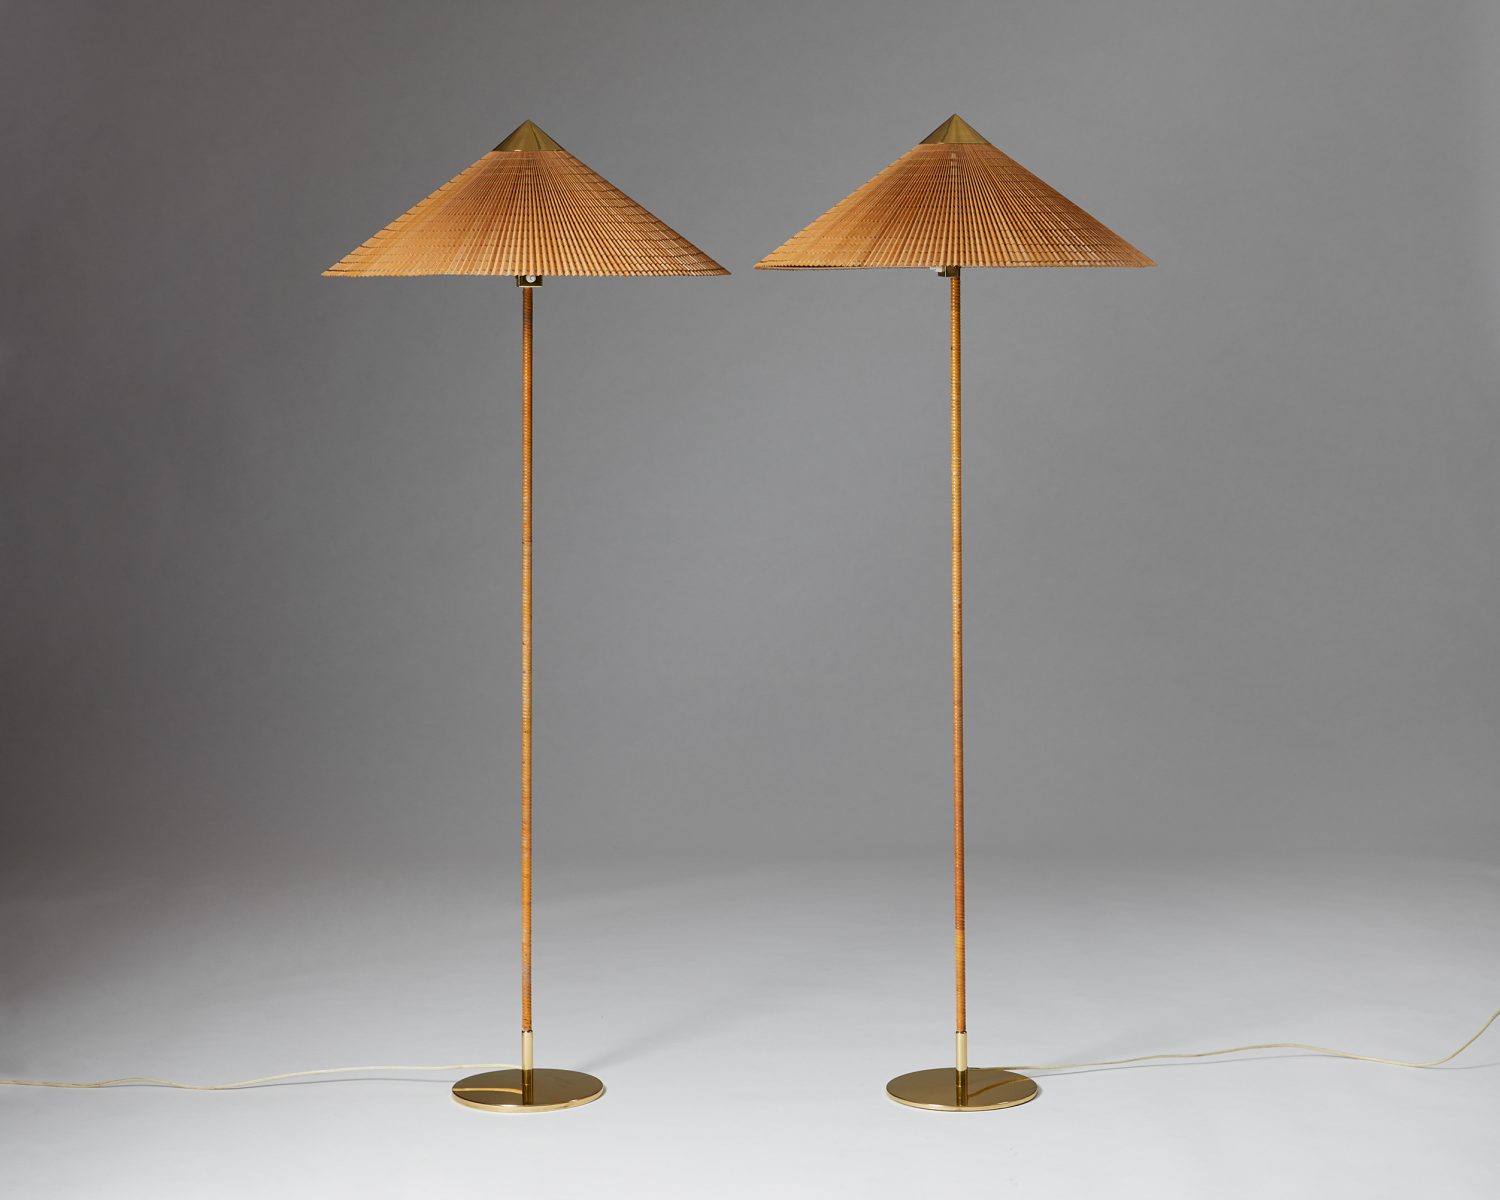 Soldat forbrydelse synge Pair of floor lamps model 9602 designed by Paavo Tynell for Taito Oy, —  Modernity